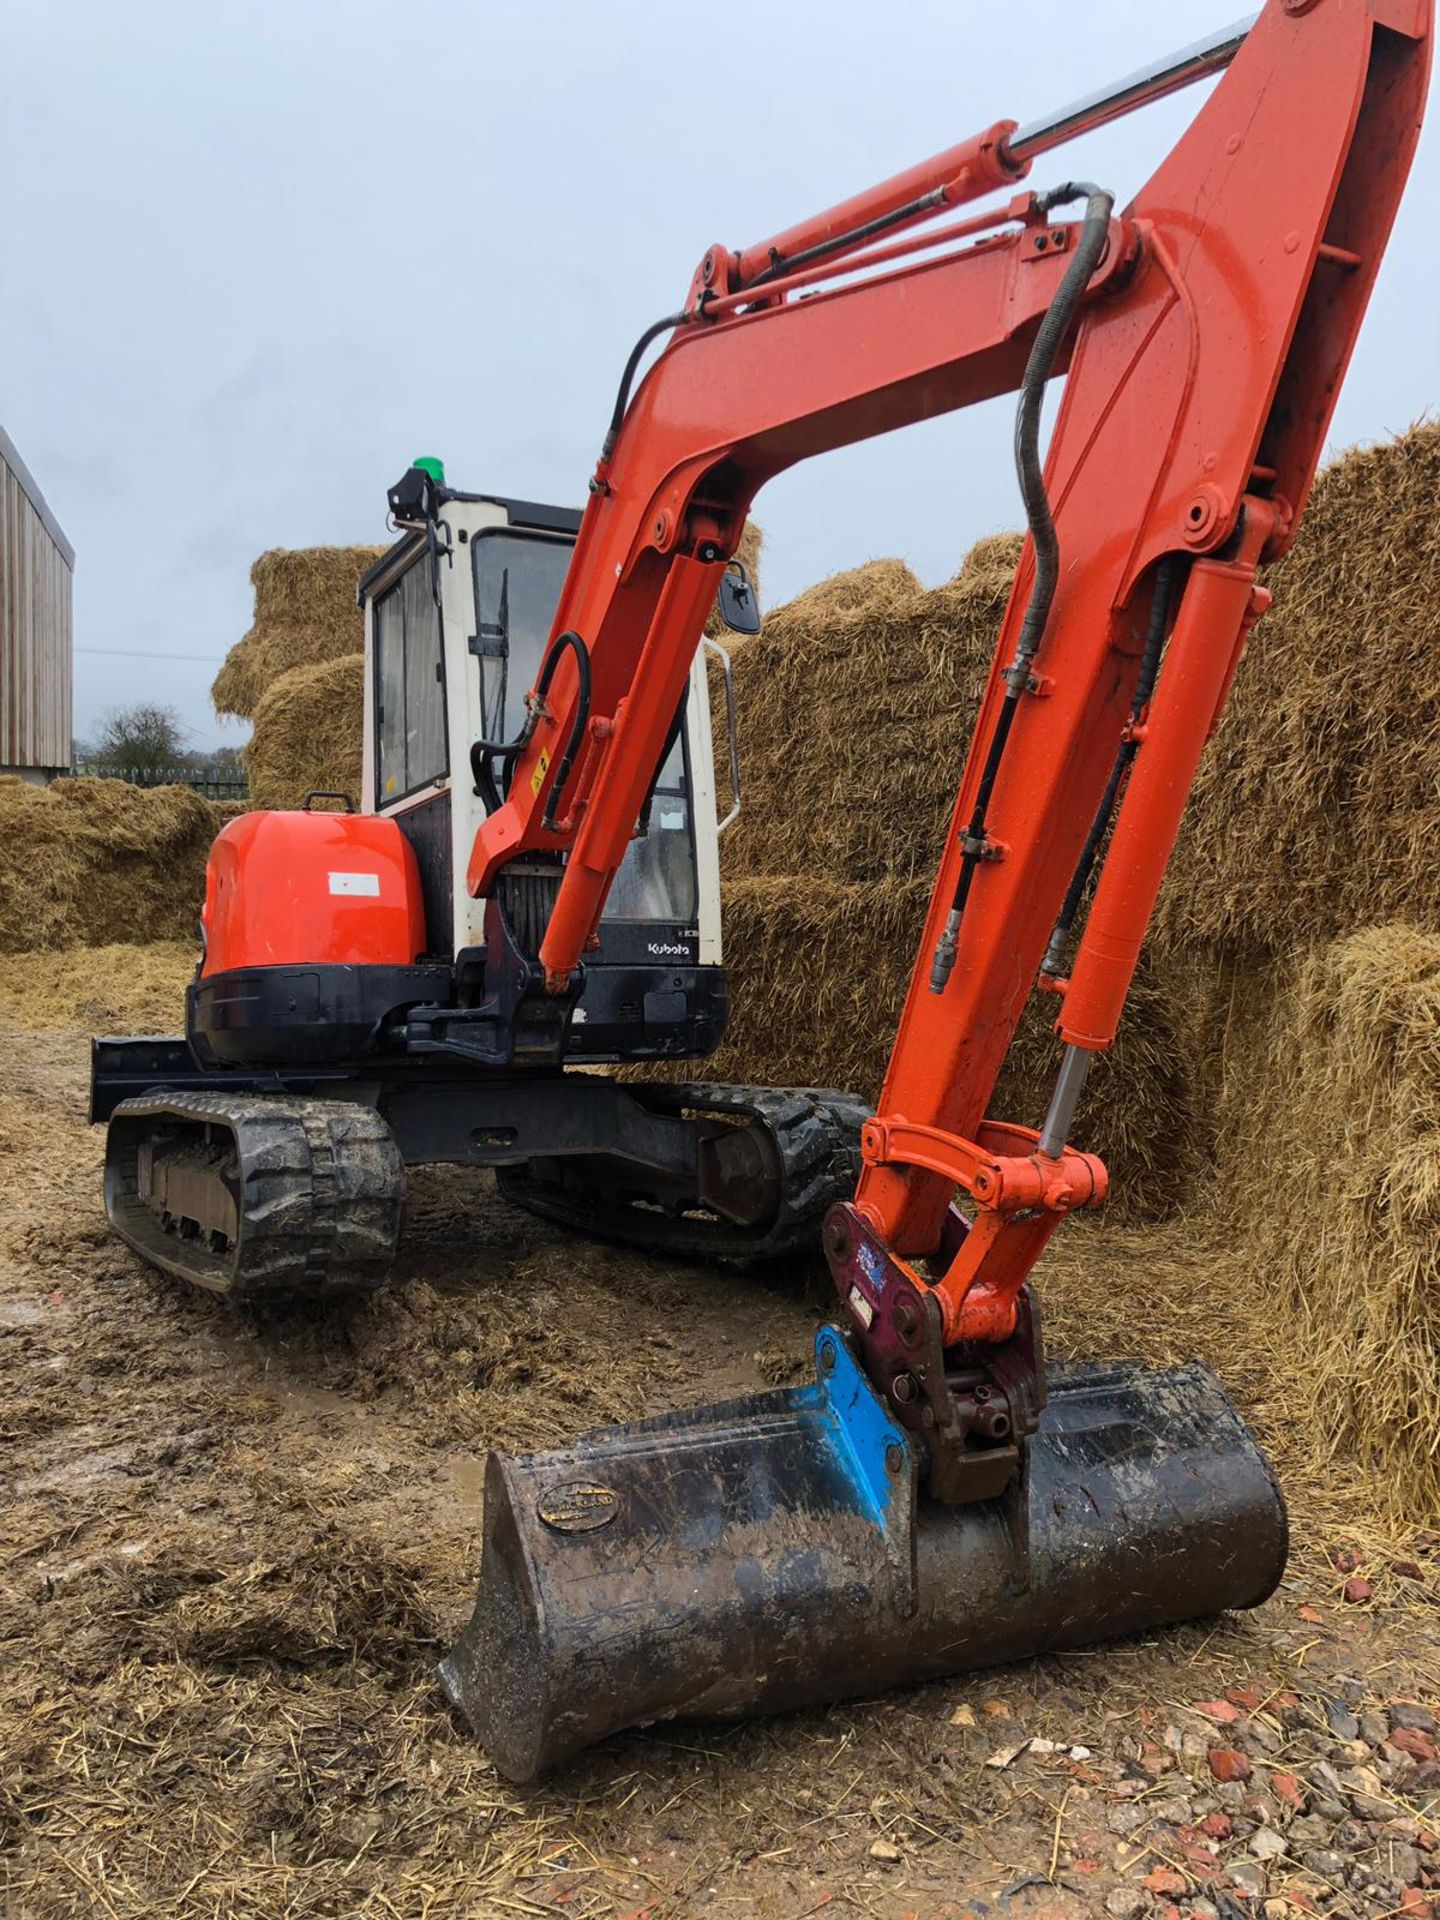 2010 KUBOTA U50-3 5 TONNE TRACKED DIGGER / EXCAVATOR WITH 3X BUCKETS, RUNS WORKS AND DIGS *PLUS VAT* - Image 3 of 9